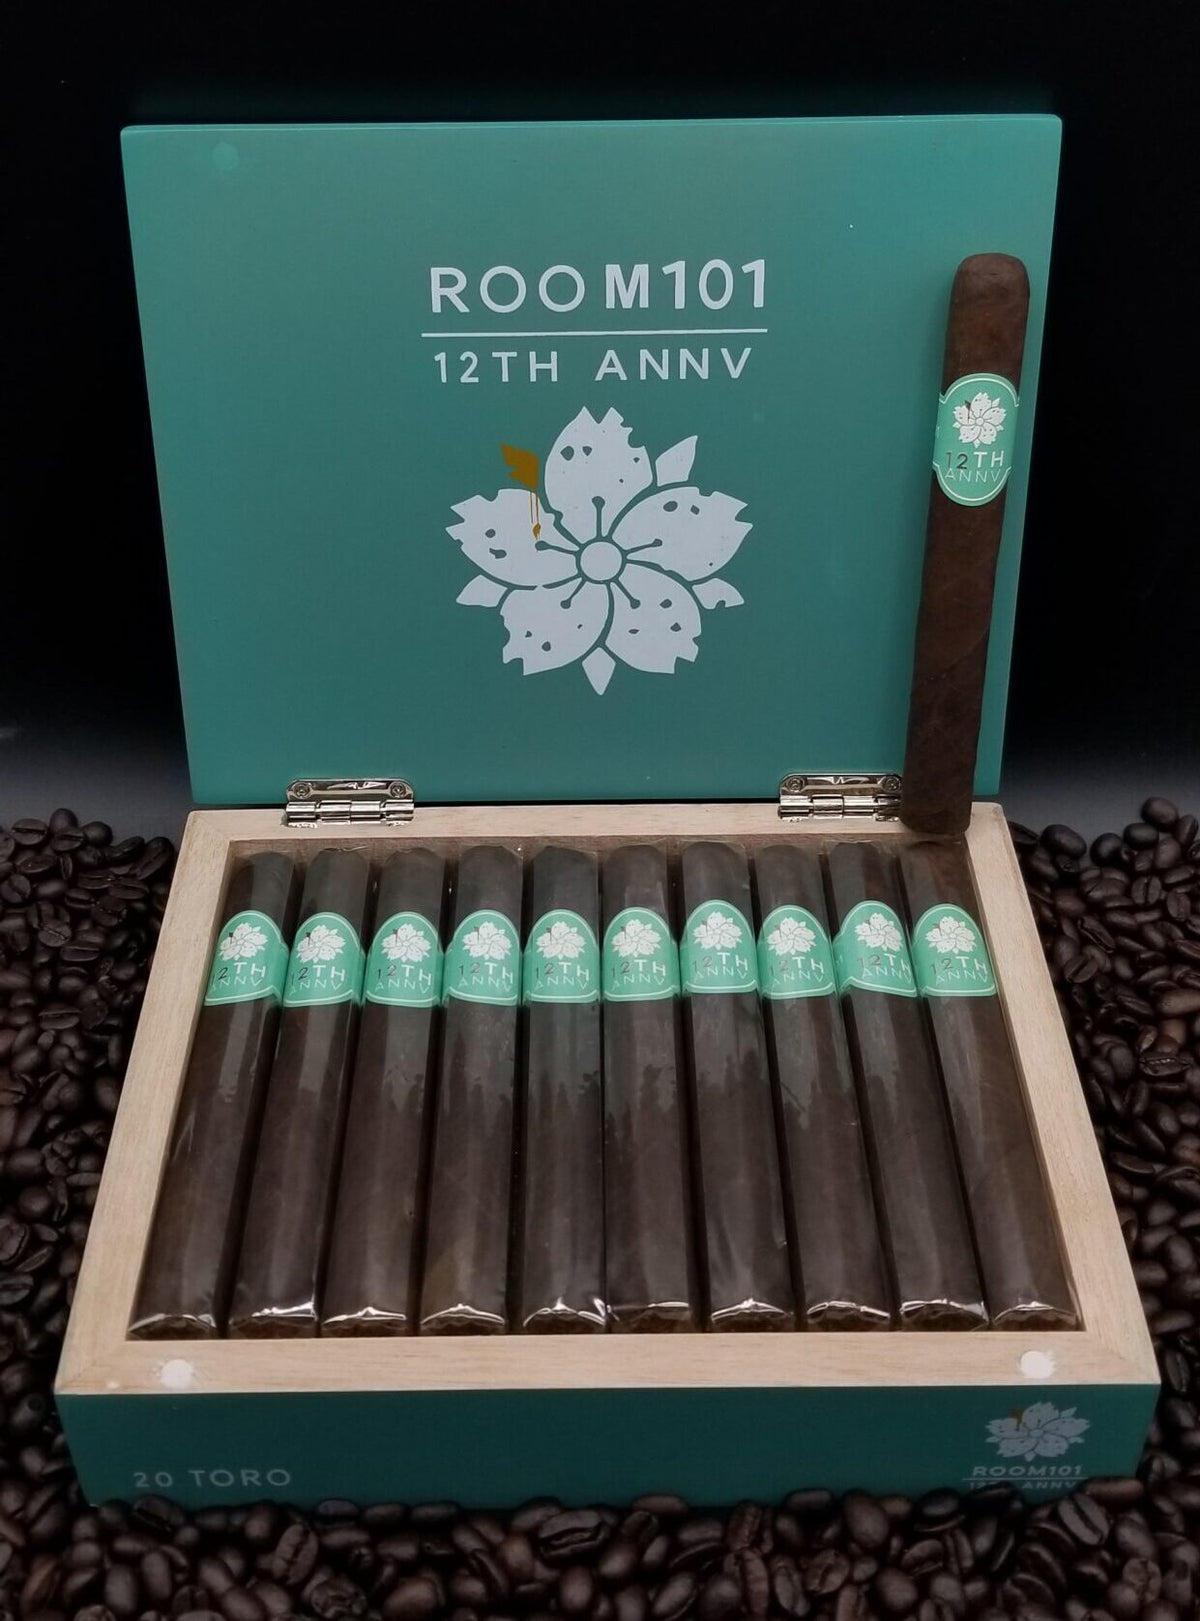 Room 101 12th Anniversary Toro cigars supplied by Sir Louis Cigars